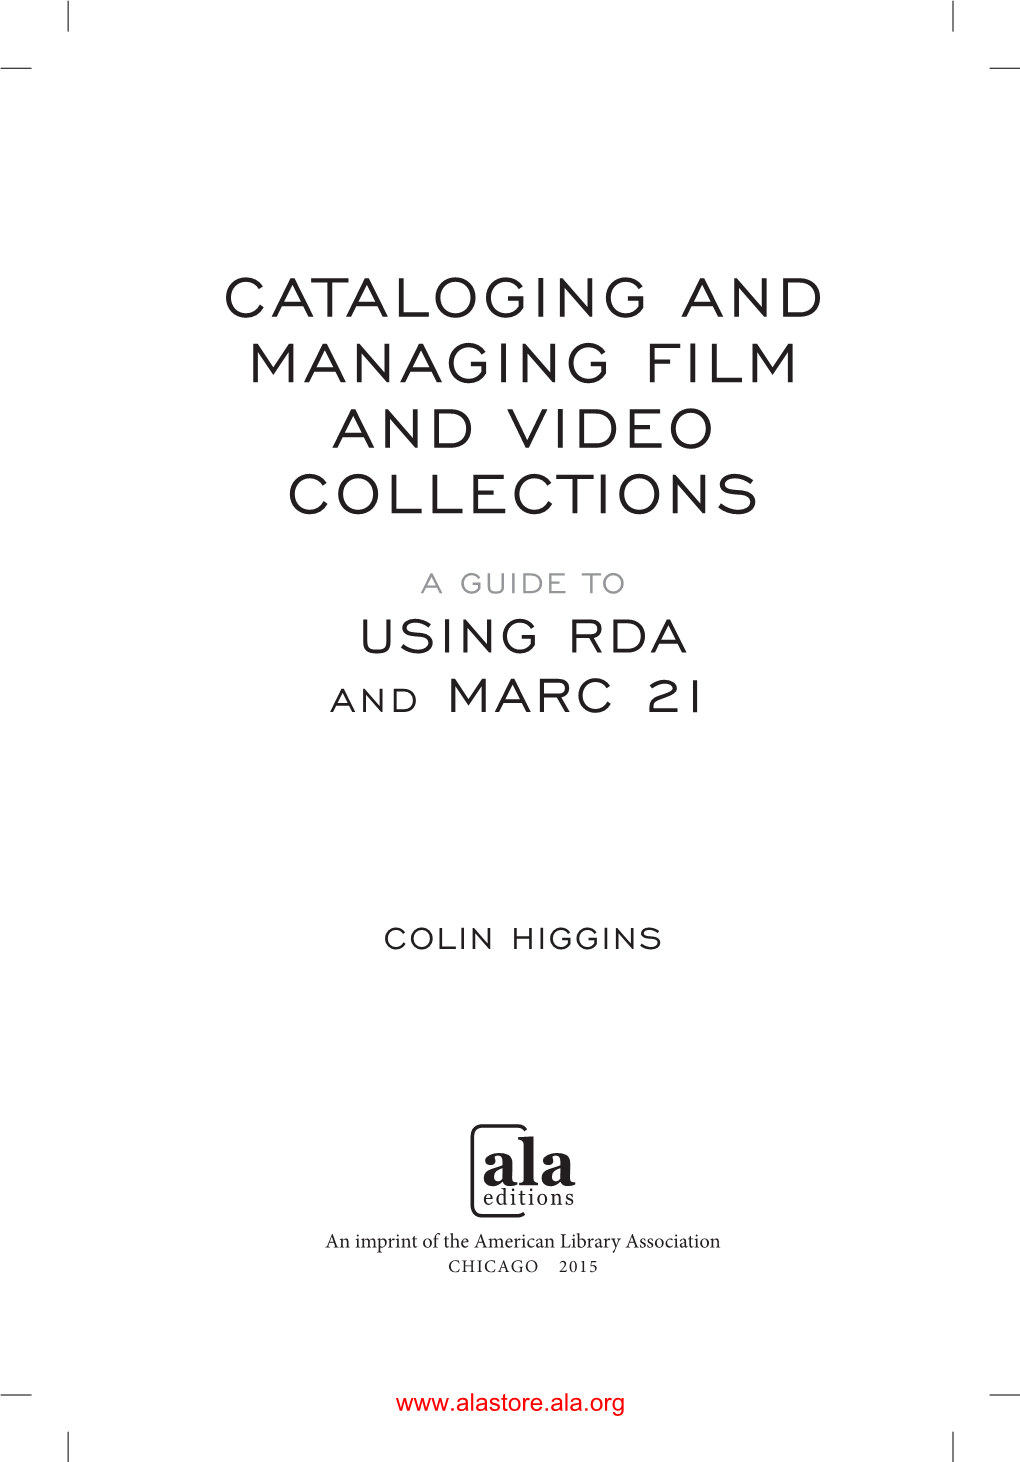 Cataloging and Managing Film and Video Collections a Guide to Using RDA and MARC 21